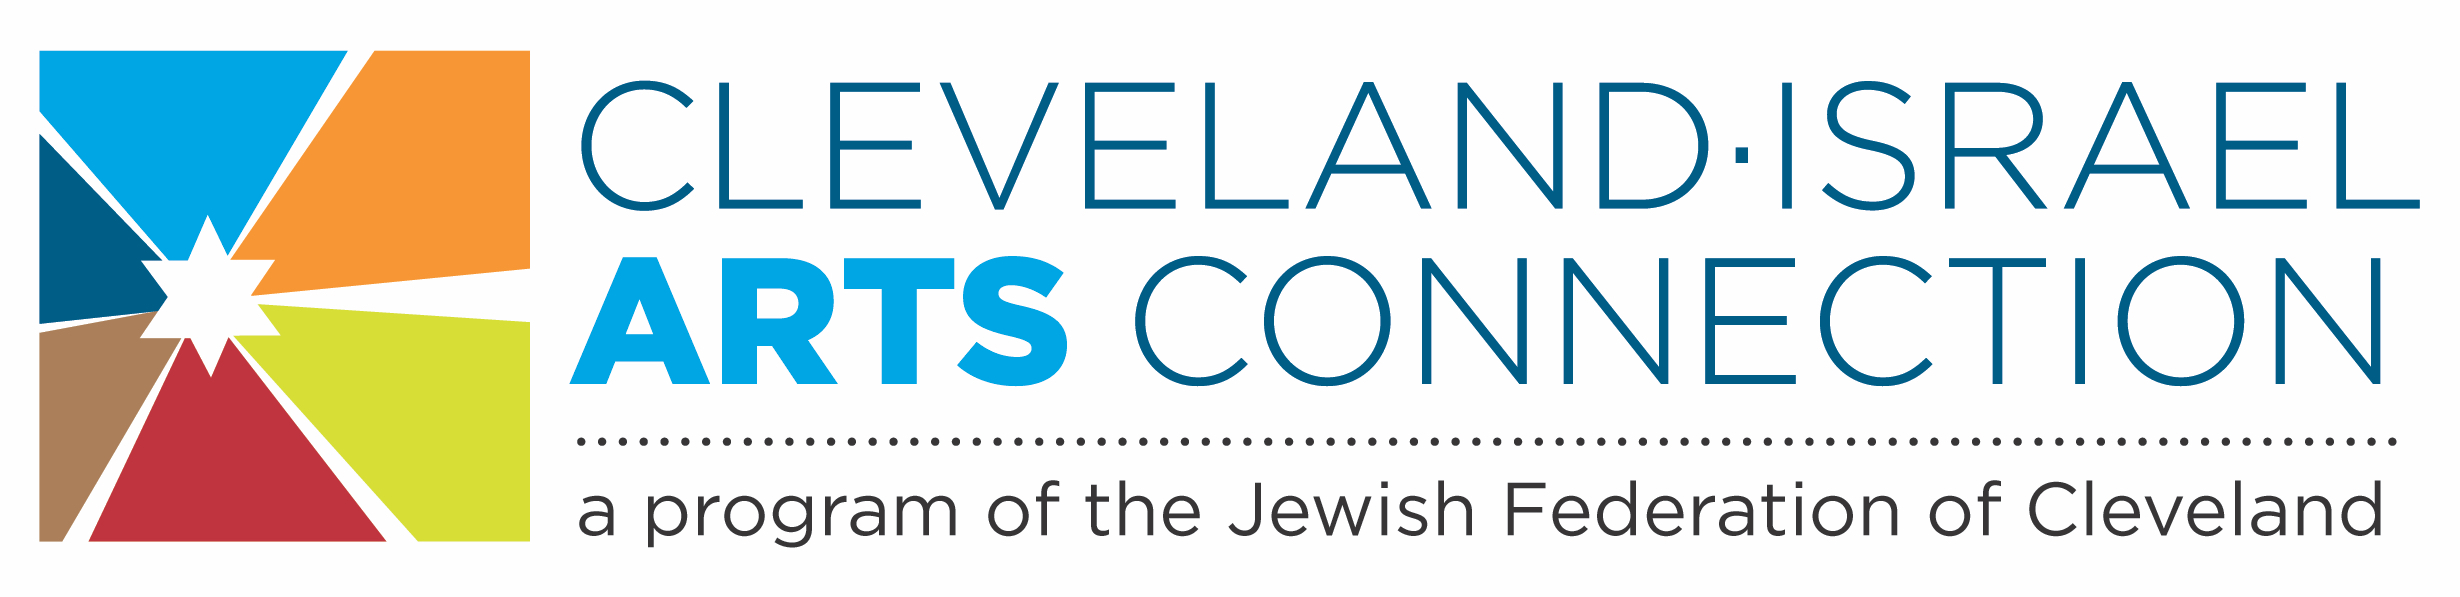 CLE Israel Arts Connection